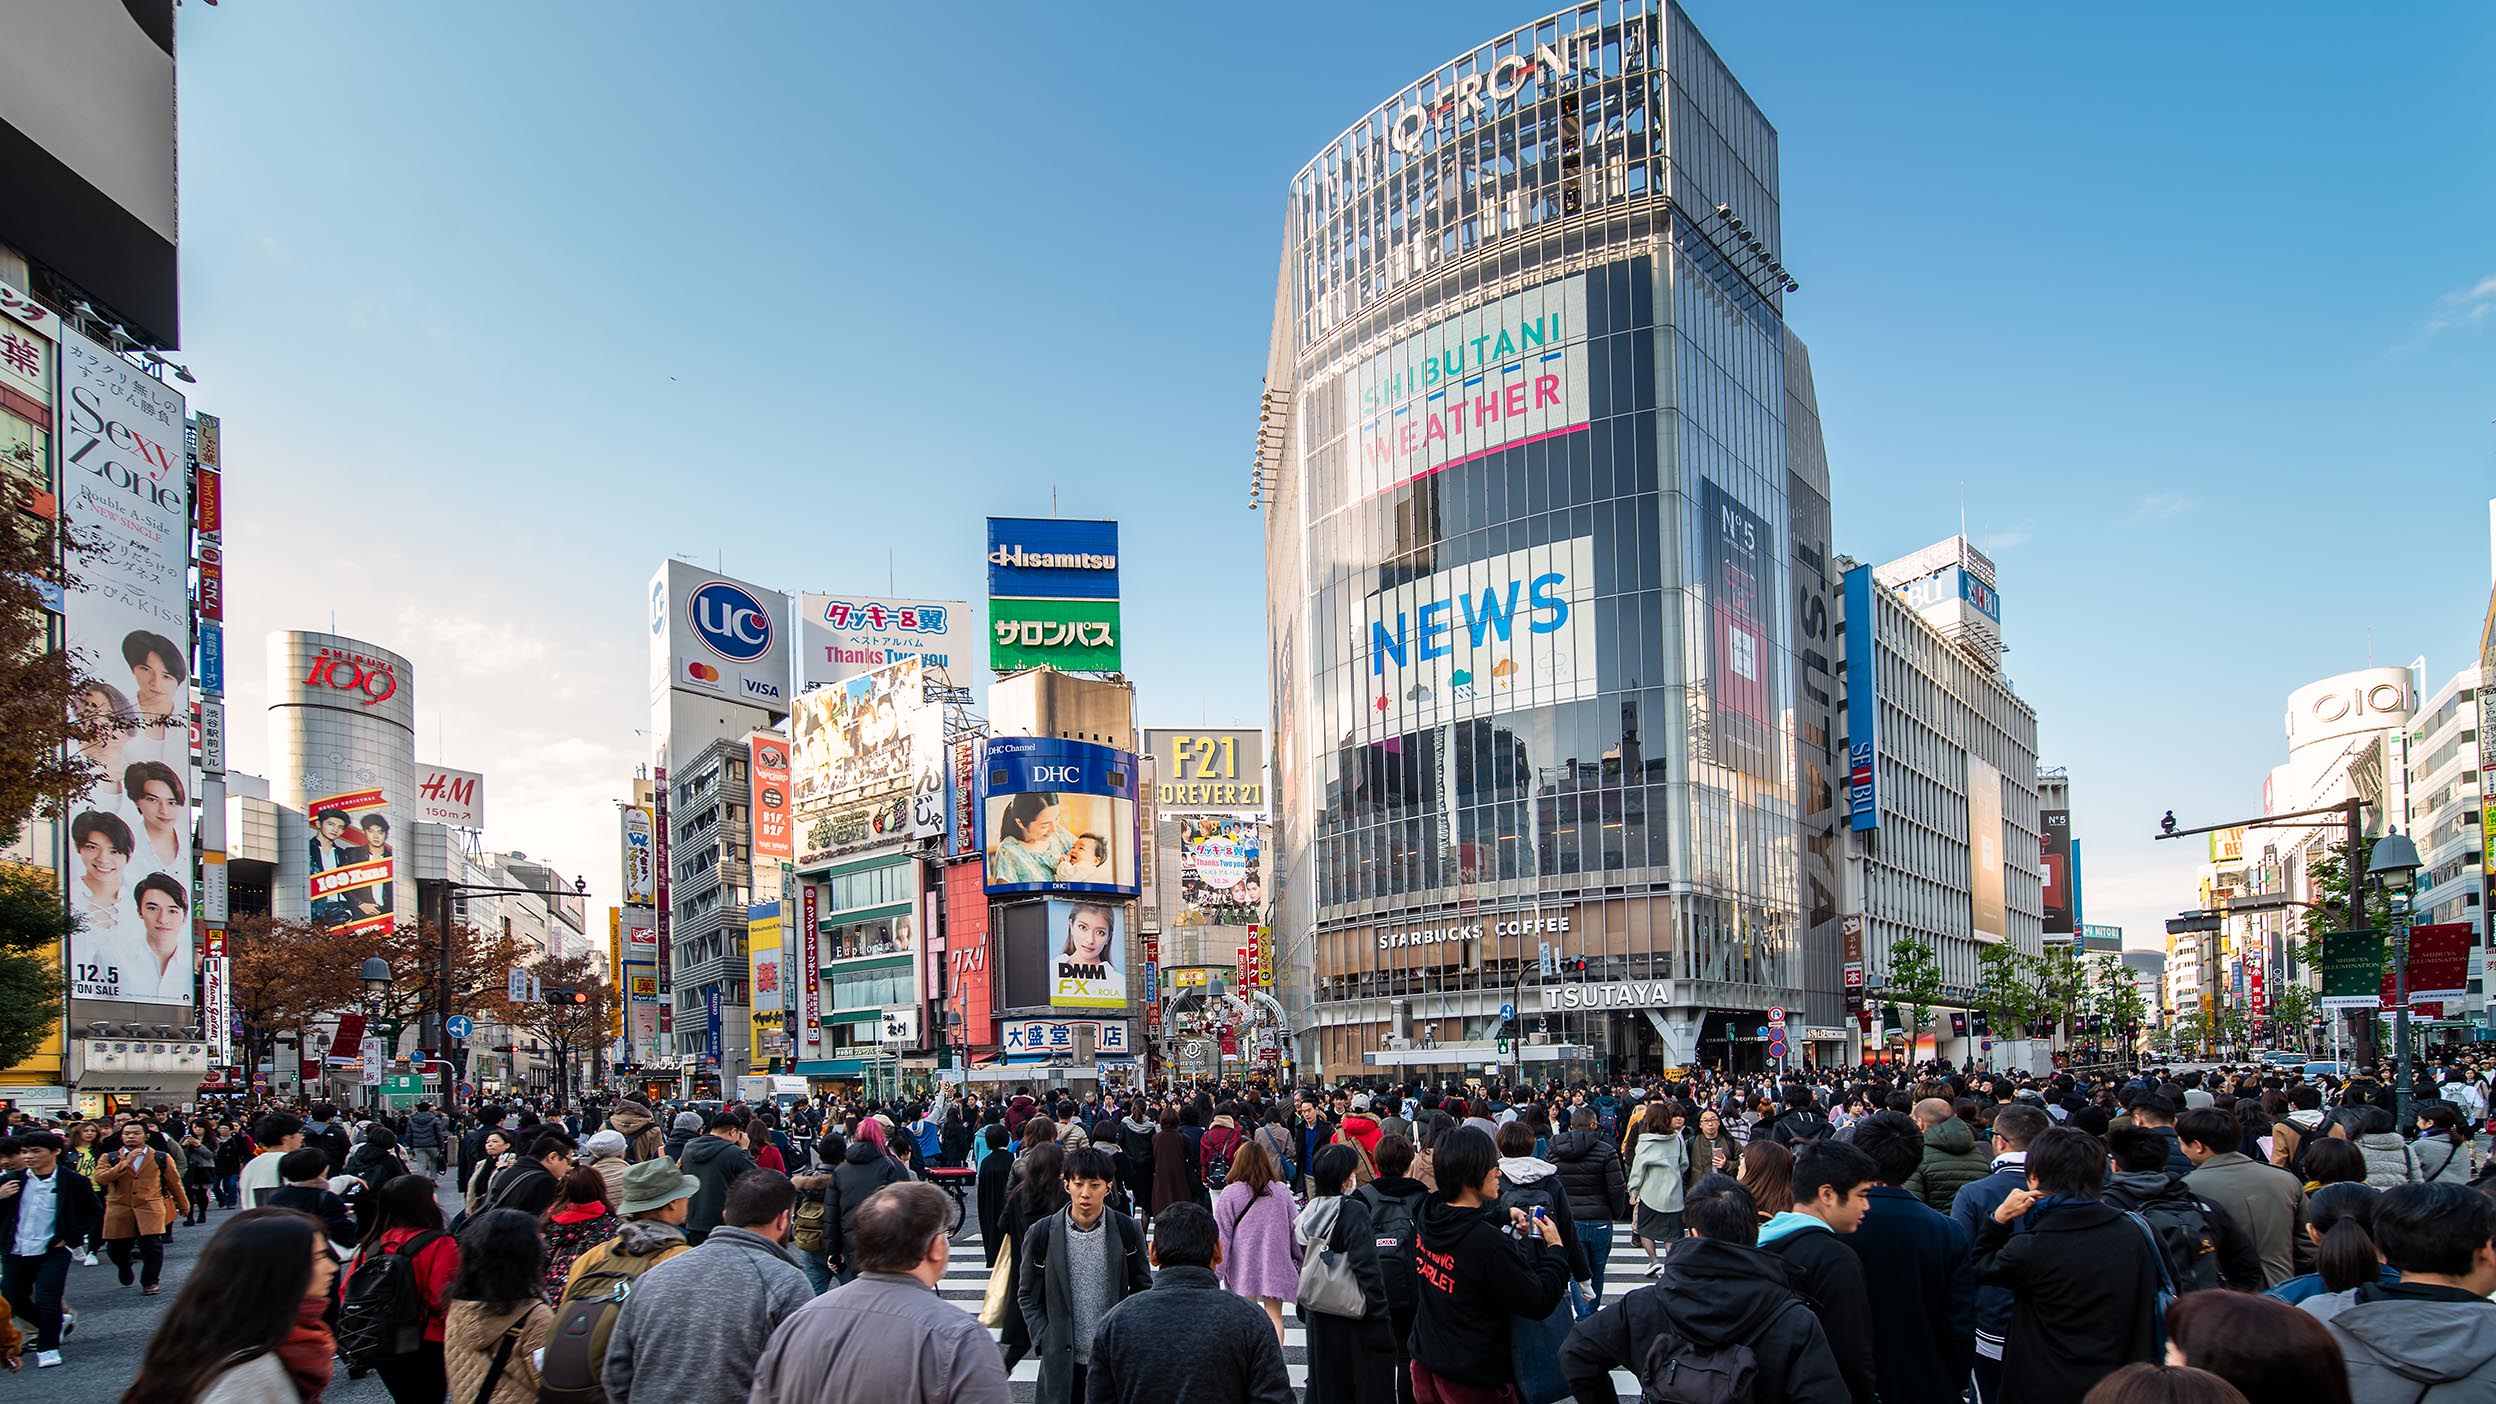 View of Shibuya Crossing in Tokyo, one of the busiest crosswalks in the world.